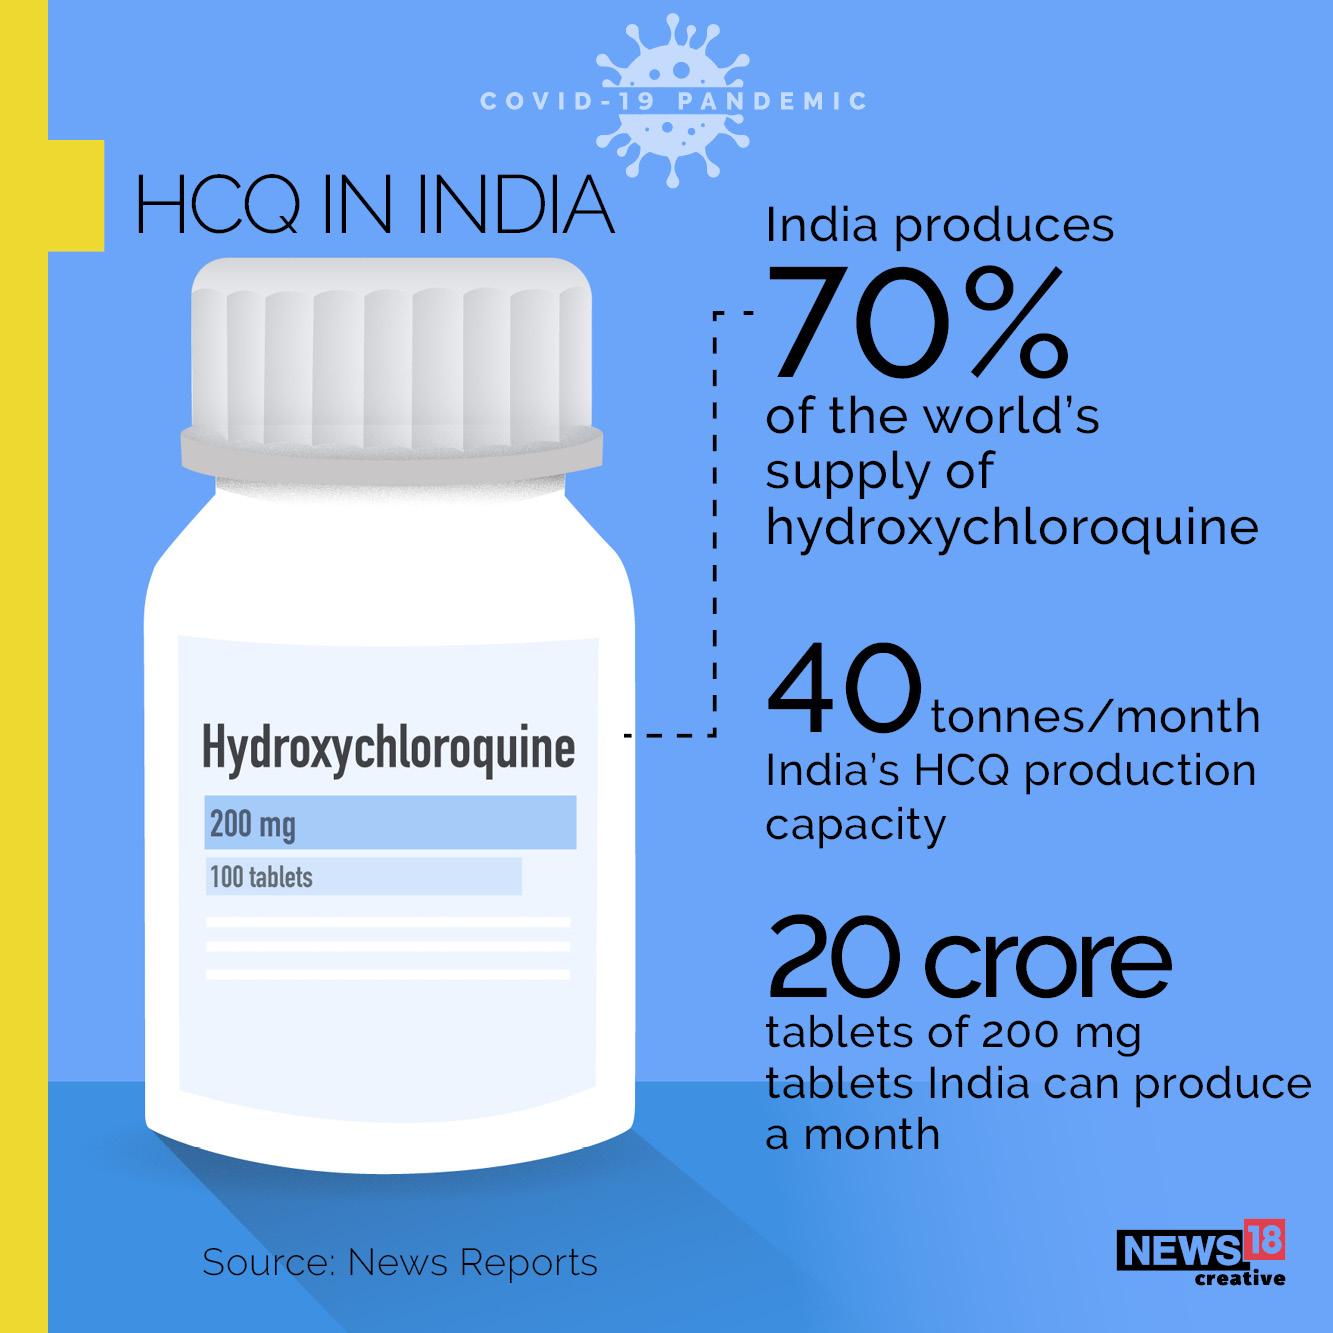 What is Hydroxylchroloquine and where does India fit in?